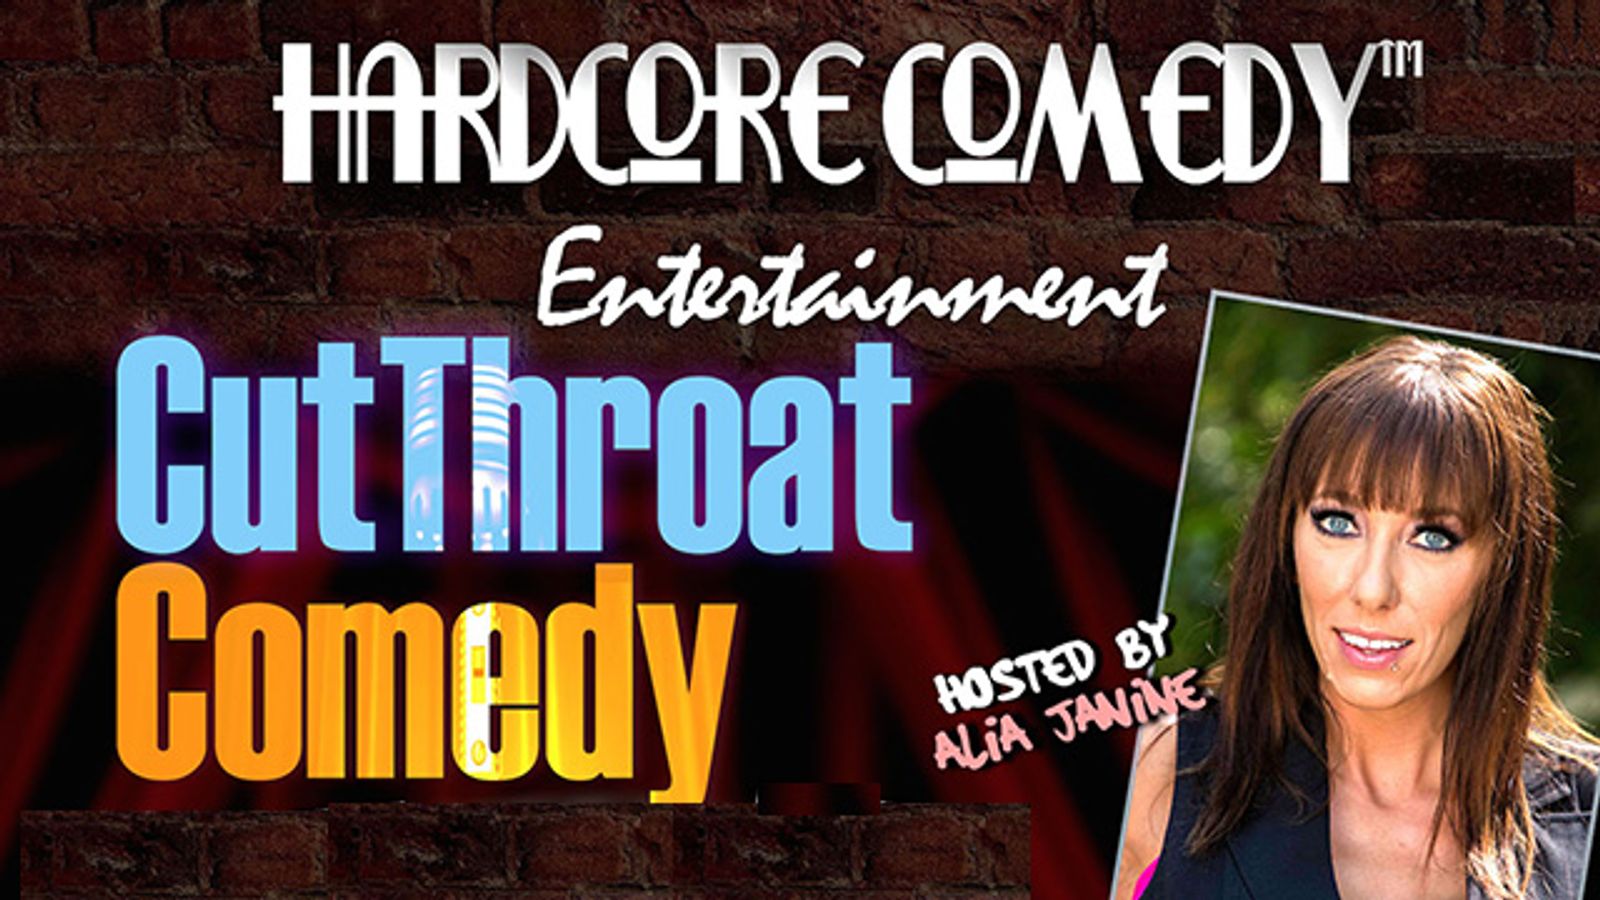 Alia Janine to Host 'Cutthroat Comedy Hour' at The Cutting Room